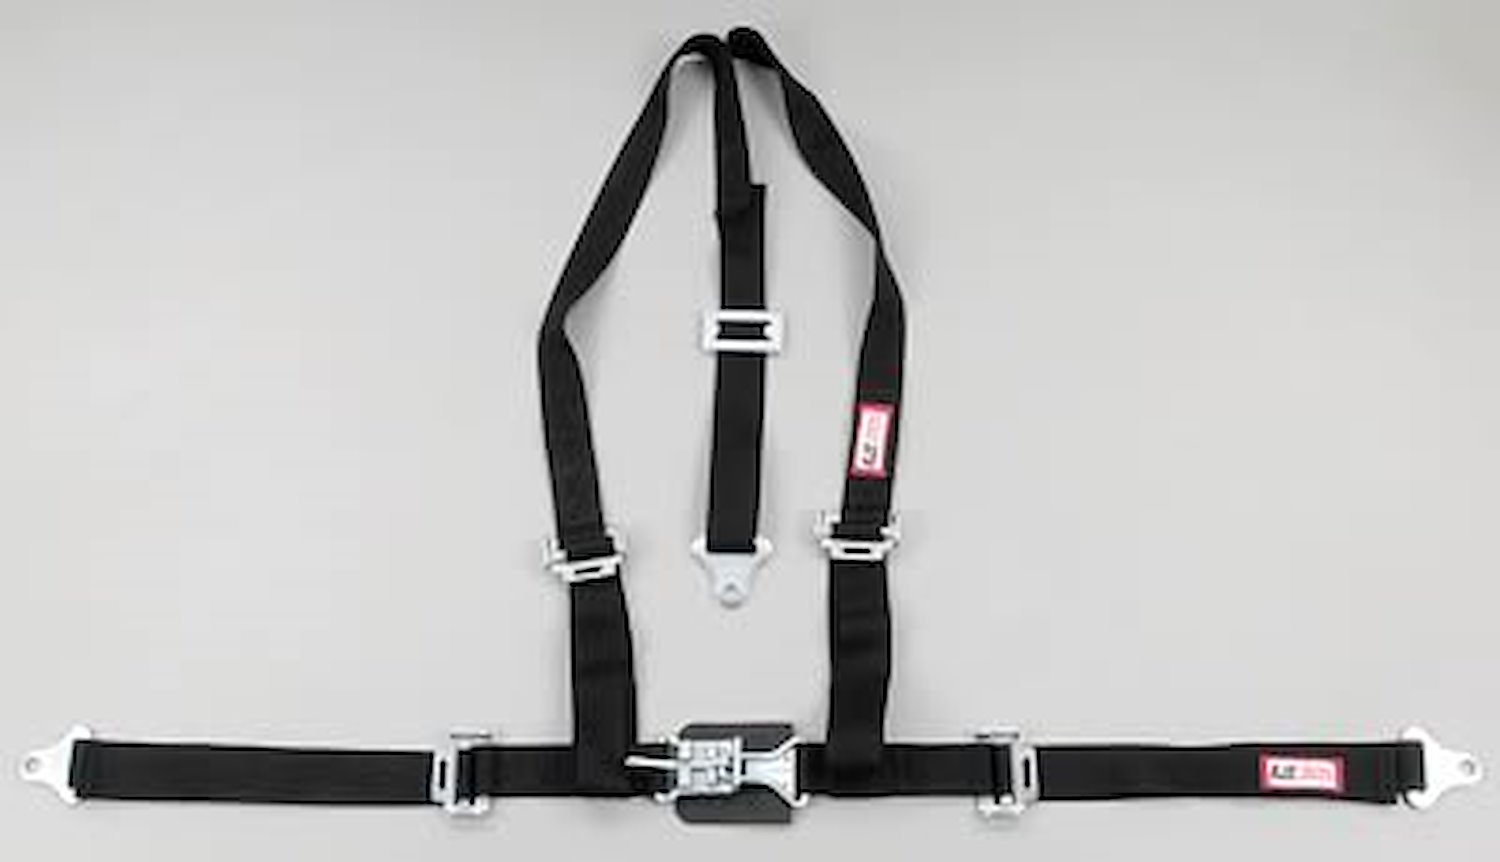 NON-SFI L&L HARNESS 2 PULL UP Lap Belt BOLT SEWN IN 2 S.H. Y FLOOR Mount WRAP/BOLT GRAY